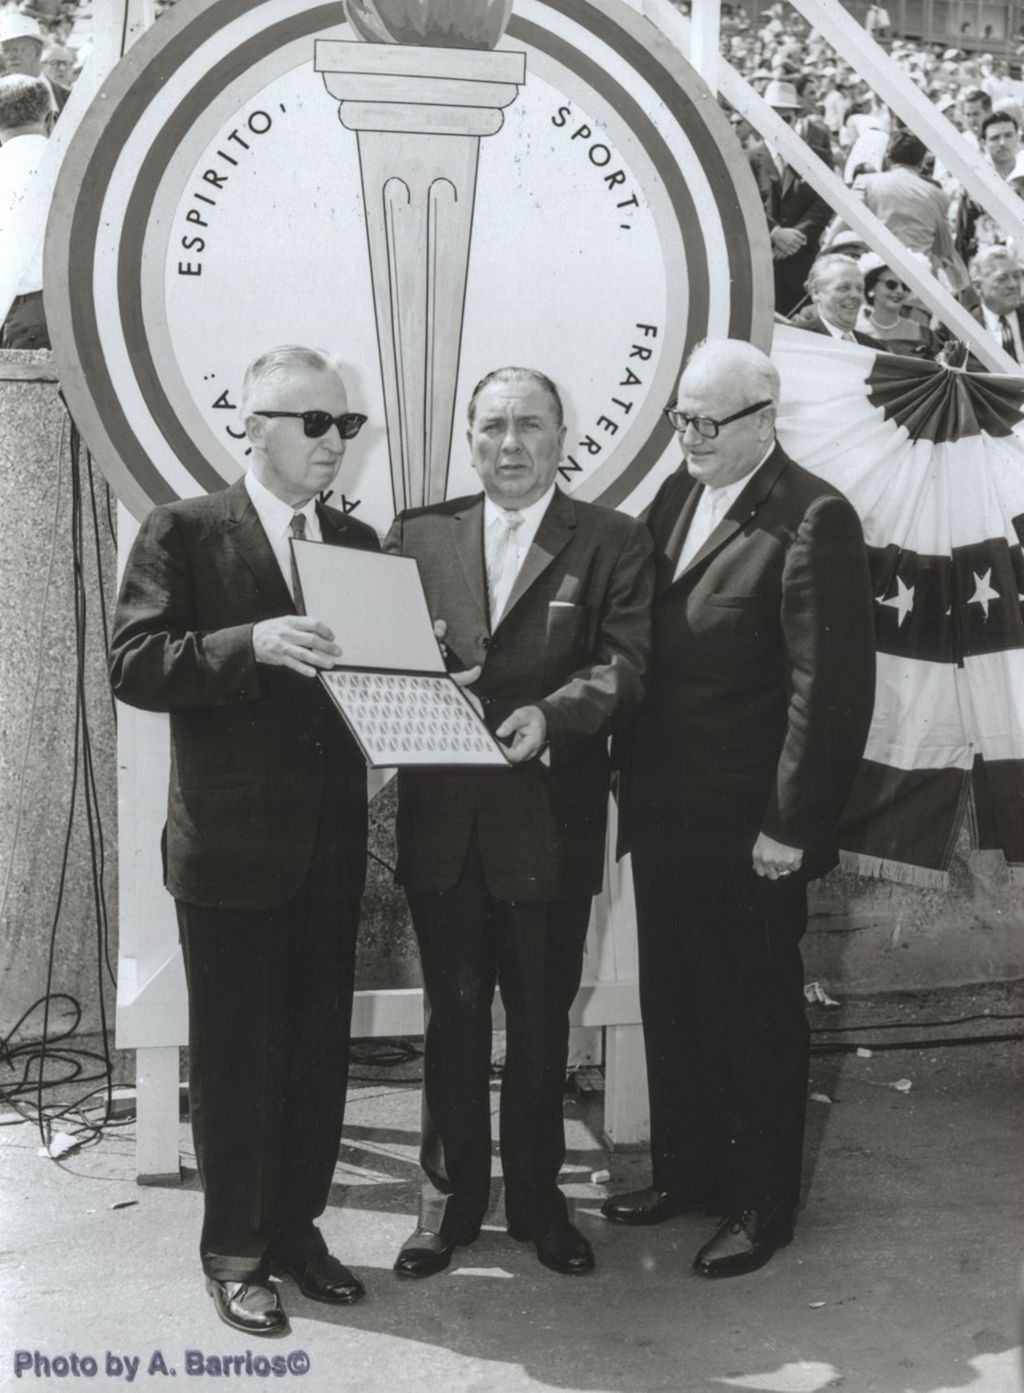 Richard J. Daley and others at the Pan American Games